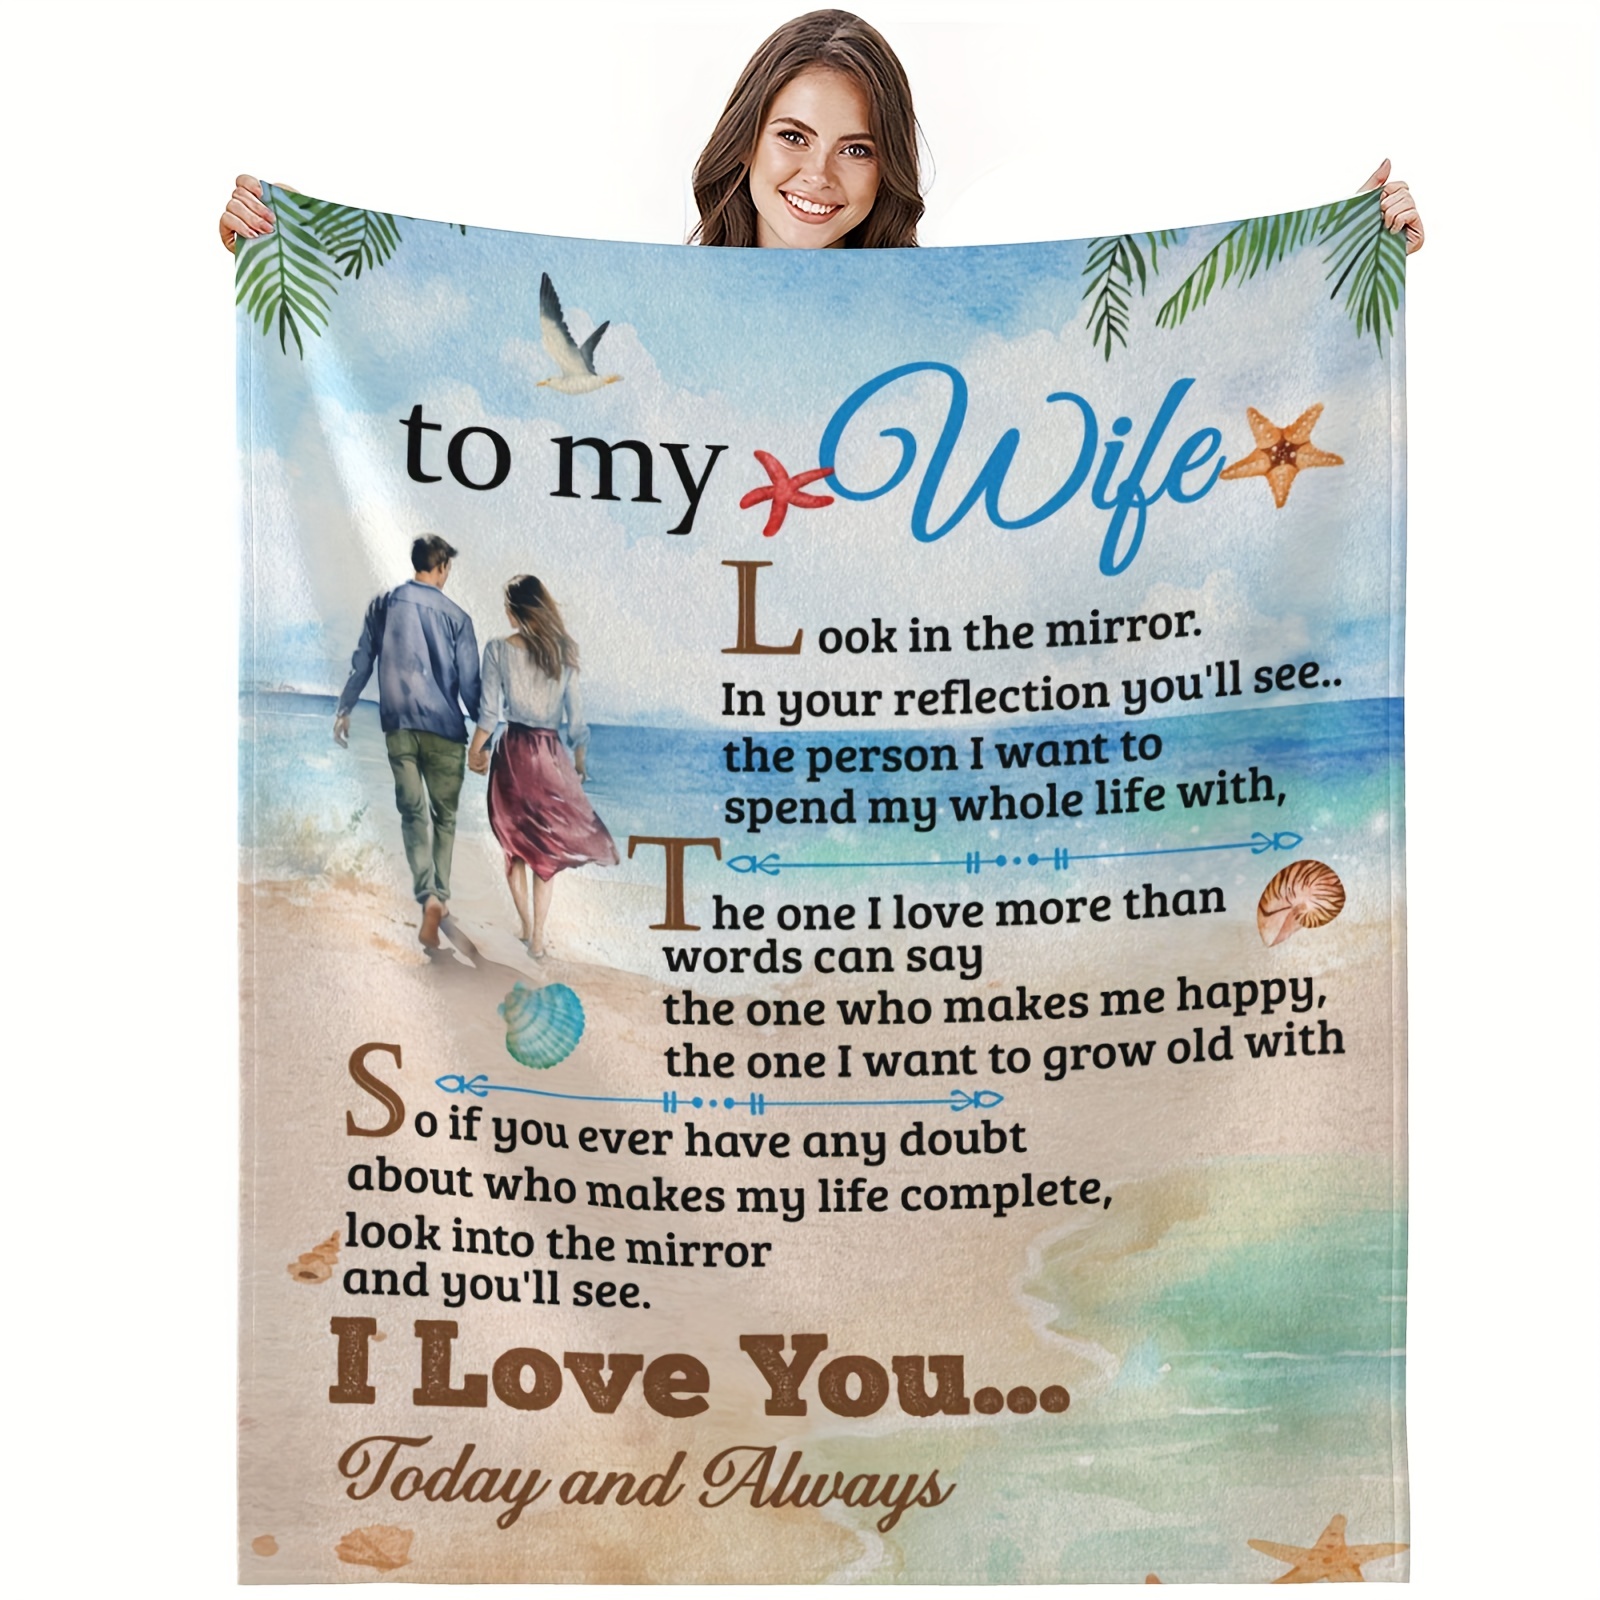 Birthday Wedding Anniversary Gift For Wife  Gifts for fiance, Wedding  anniversary gifts, Romantic gifts for wife